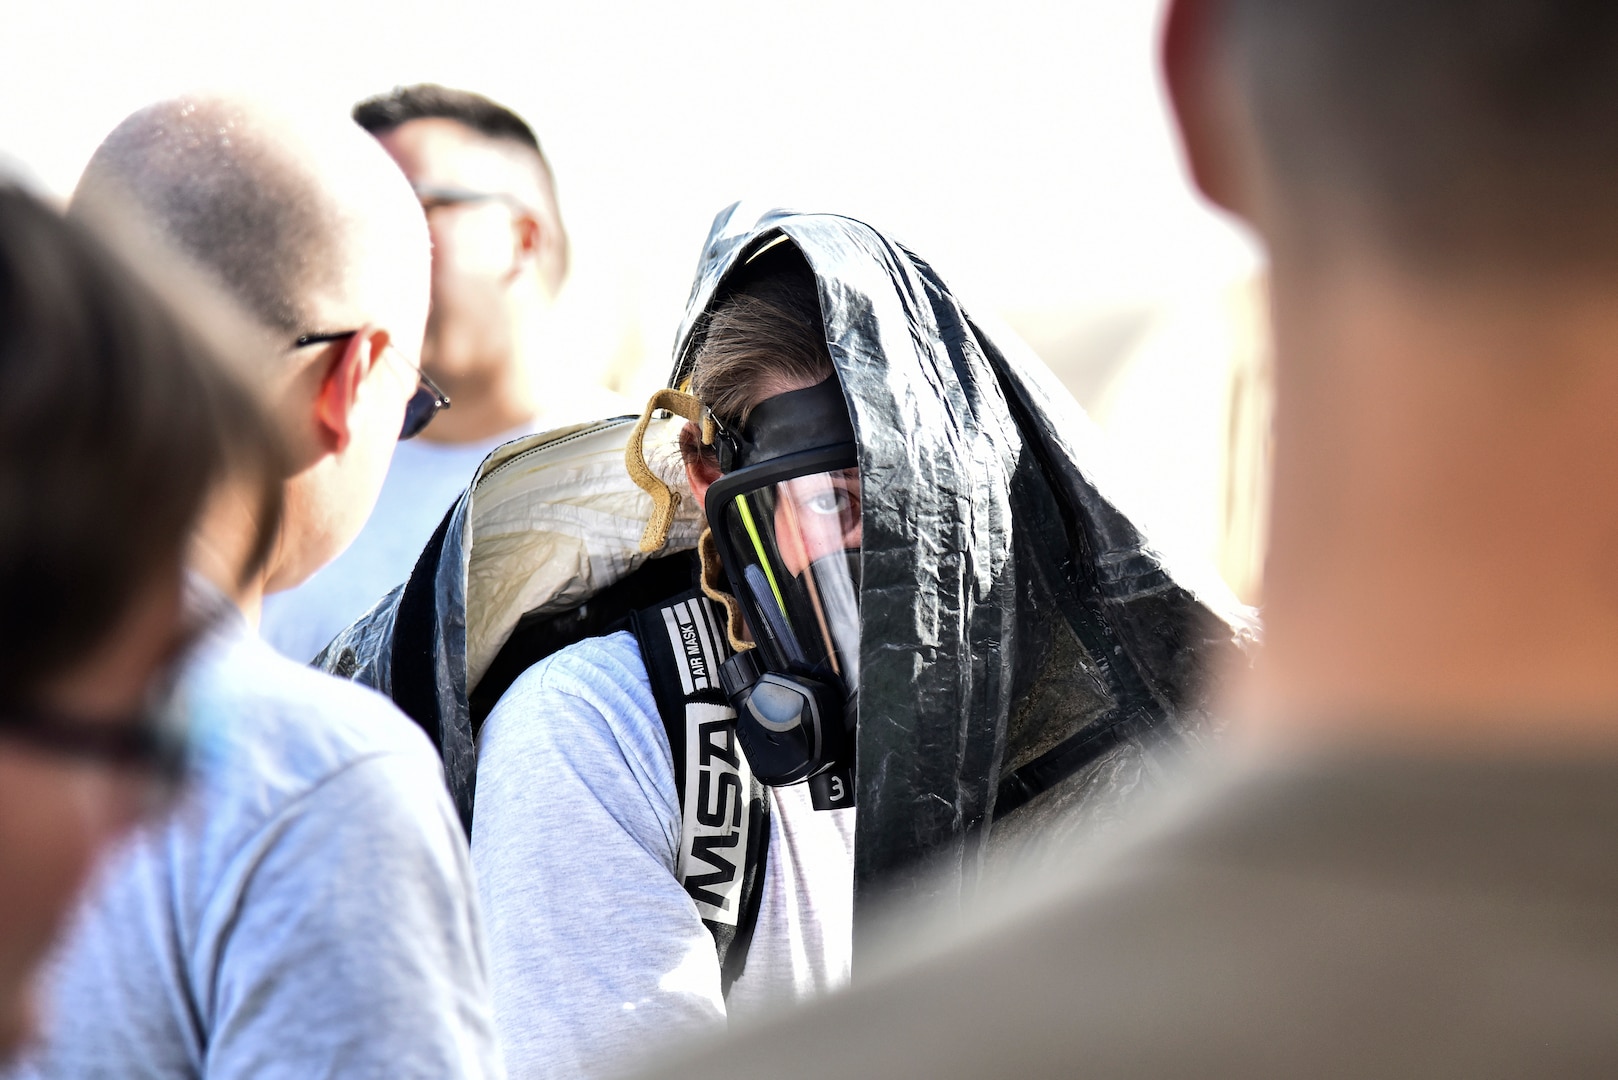 U.S. Air Force Senior Airmen Sarah Howell, 380th Expeditionary Civil Engineer Squadron emergency management journeyman, dons a Level-A suit during a hazardous materials exercise at Al Dhafra Air Base, United Arab Emirates, Jan. 4, 2019. The 380th ECES Fire Department and Emergency Management flights conducted a joint-agency hazardous material exercise for training purposes. (U.S. Air Force photo by Senior Airman Mya M. Crosby)